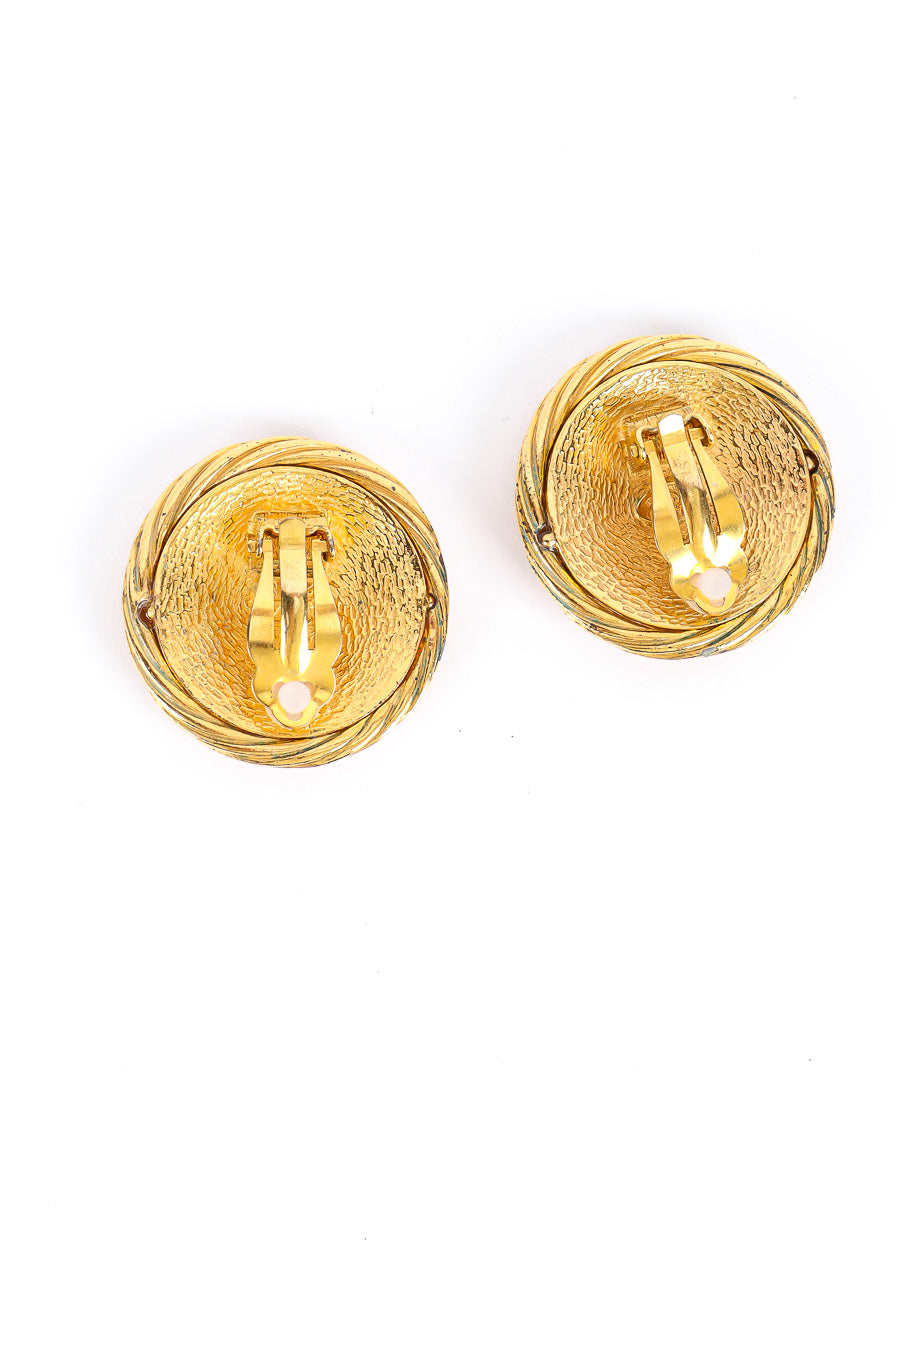 Classic CC monogram rope earrings by Chanel Clip-ons photo detail @recessla